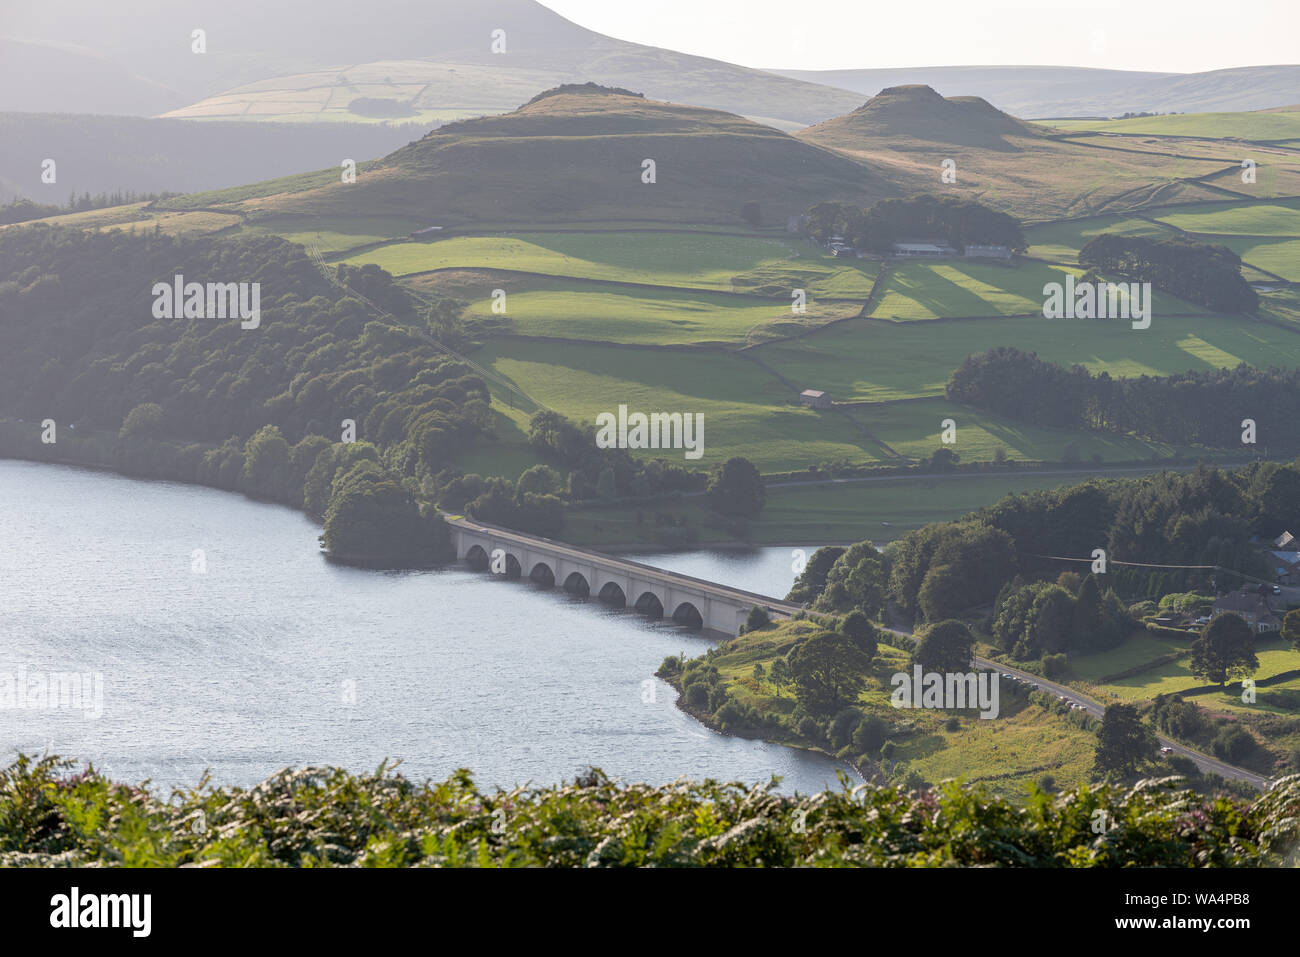 View of the Ashopton Viaduct, Ladybower Reservoir, and Crook Hill in the Derbyshire Peak District National Park, England, UK. Stock Photo